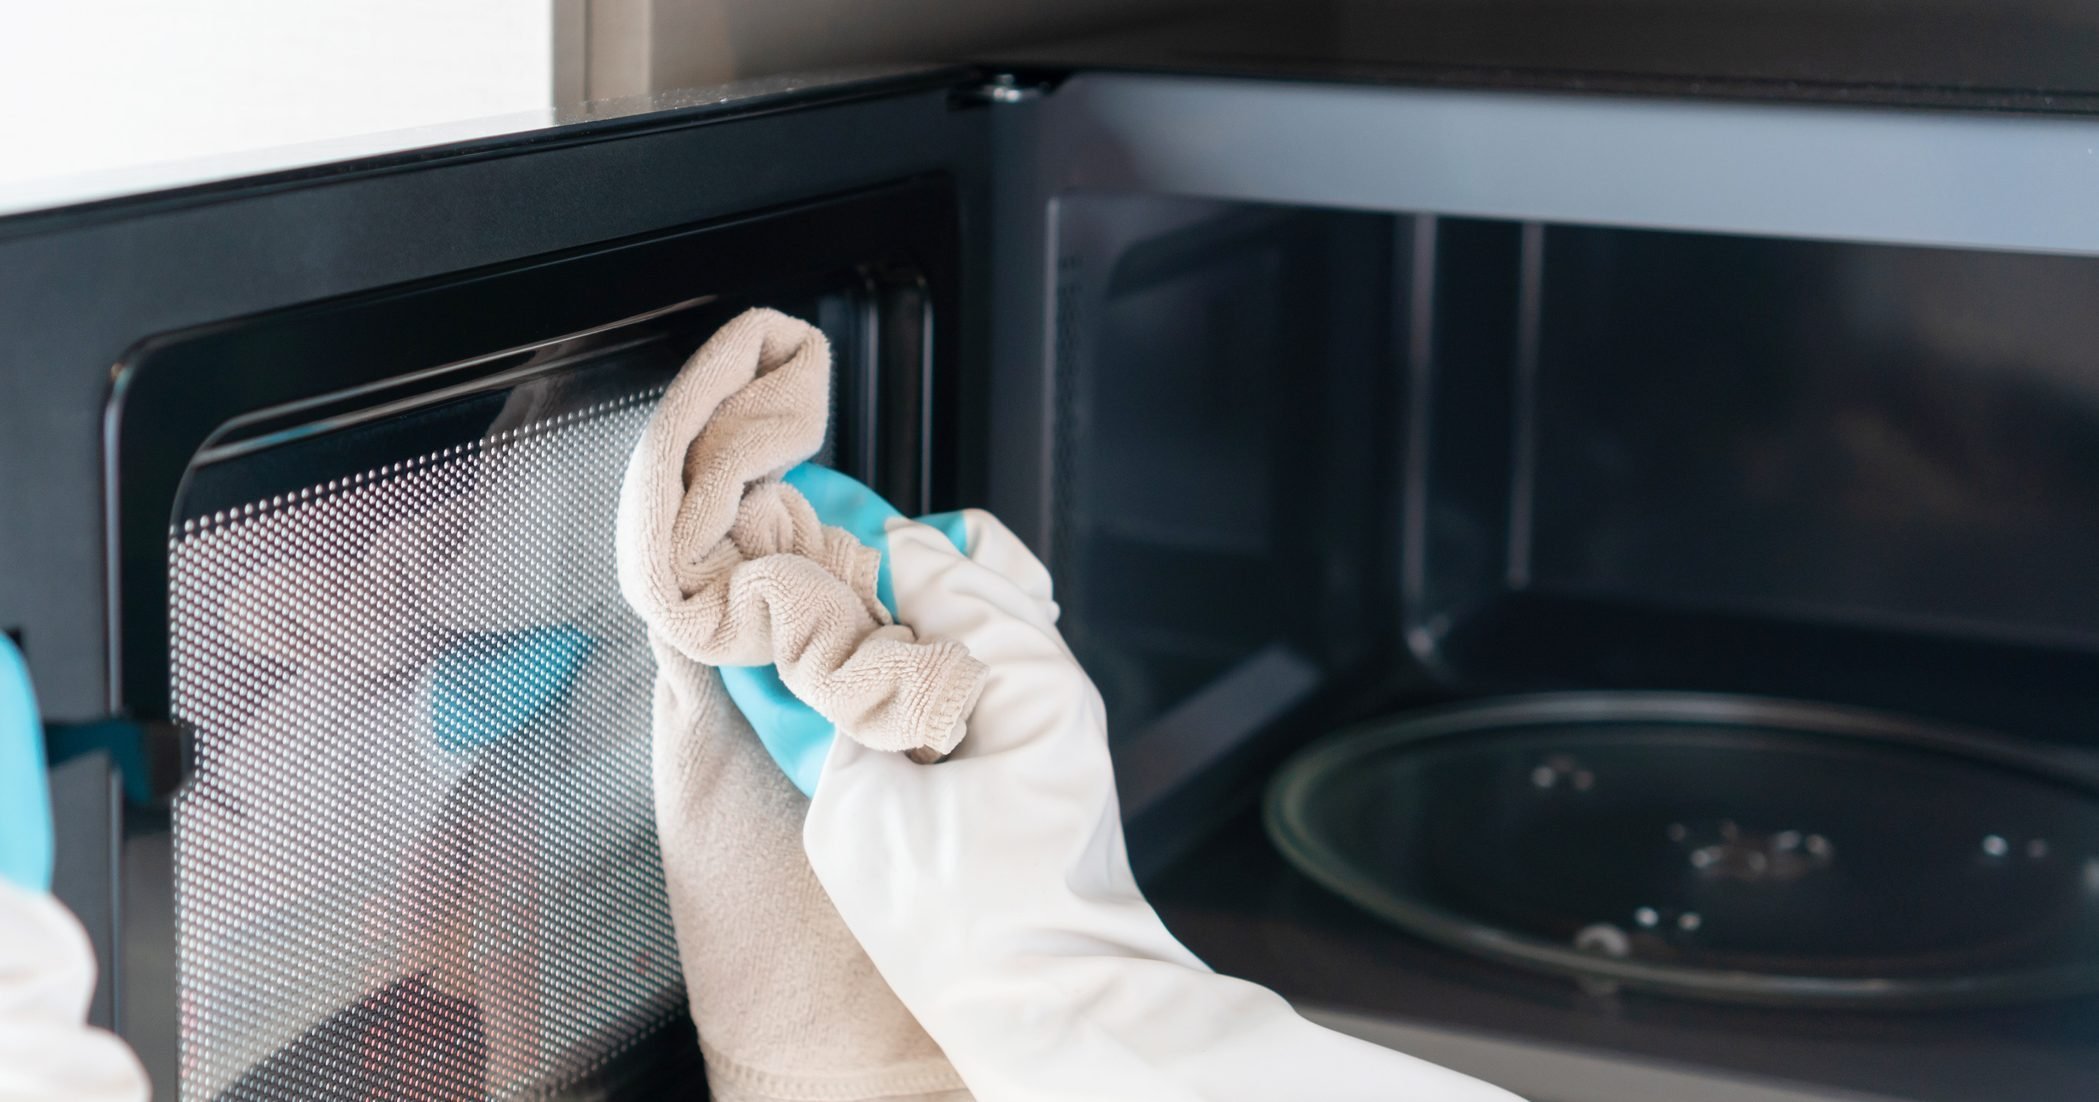 How to Clean Your Office Microwave